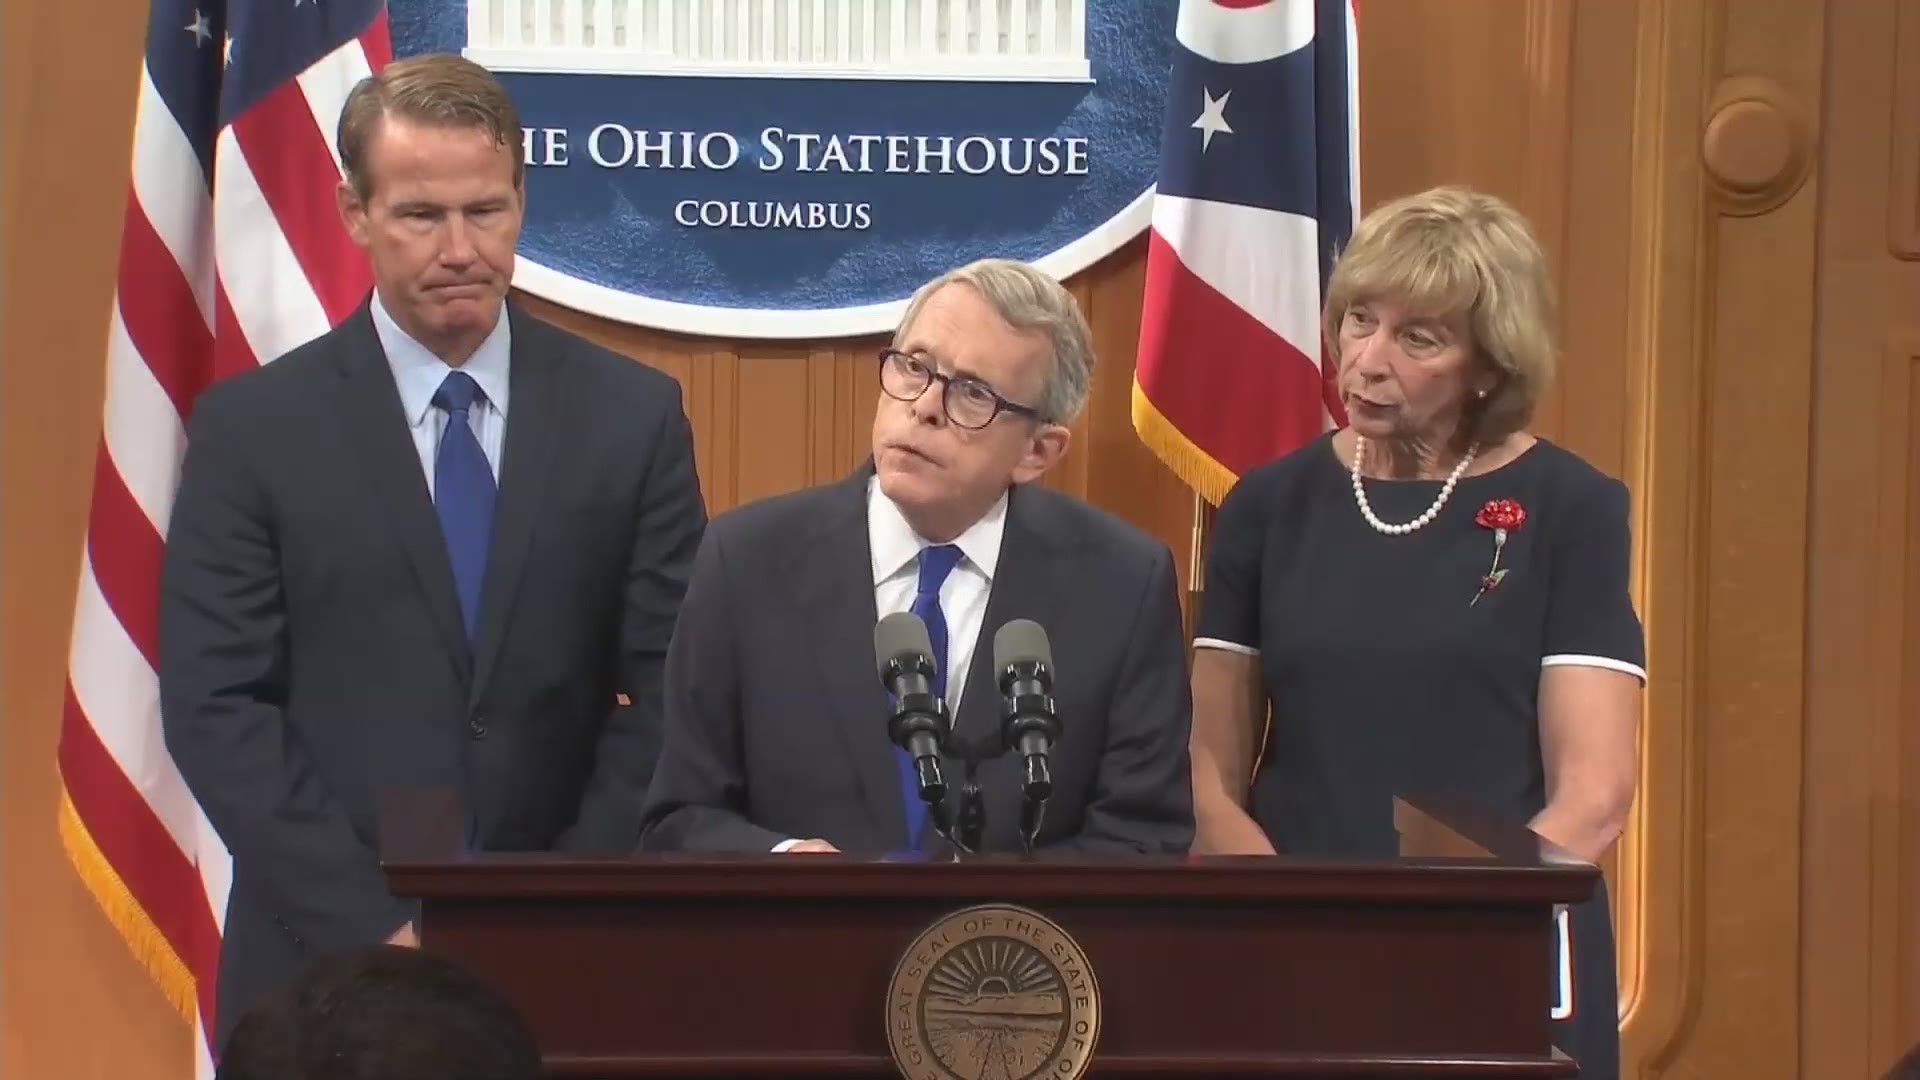 Aug. 6, 2019: 'We are expanding our school safety tip line where kids and adults can call or text anonymously with tips about potential school violence. I'm calling on Ohioans today to utilize that tip line. The number is 844-723-3764.'